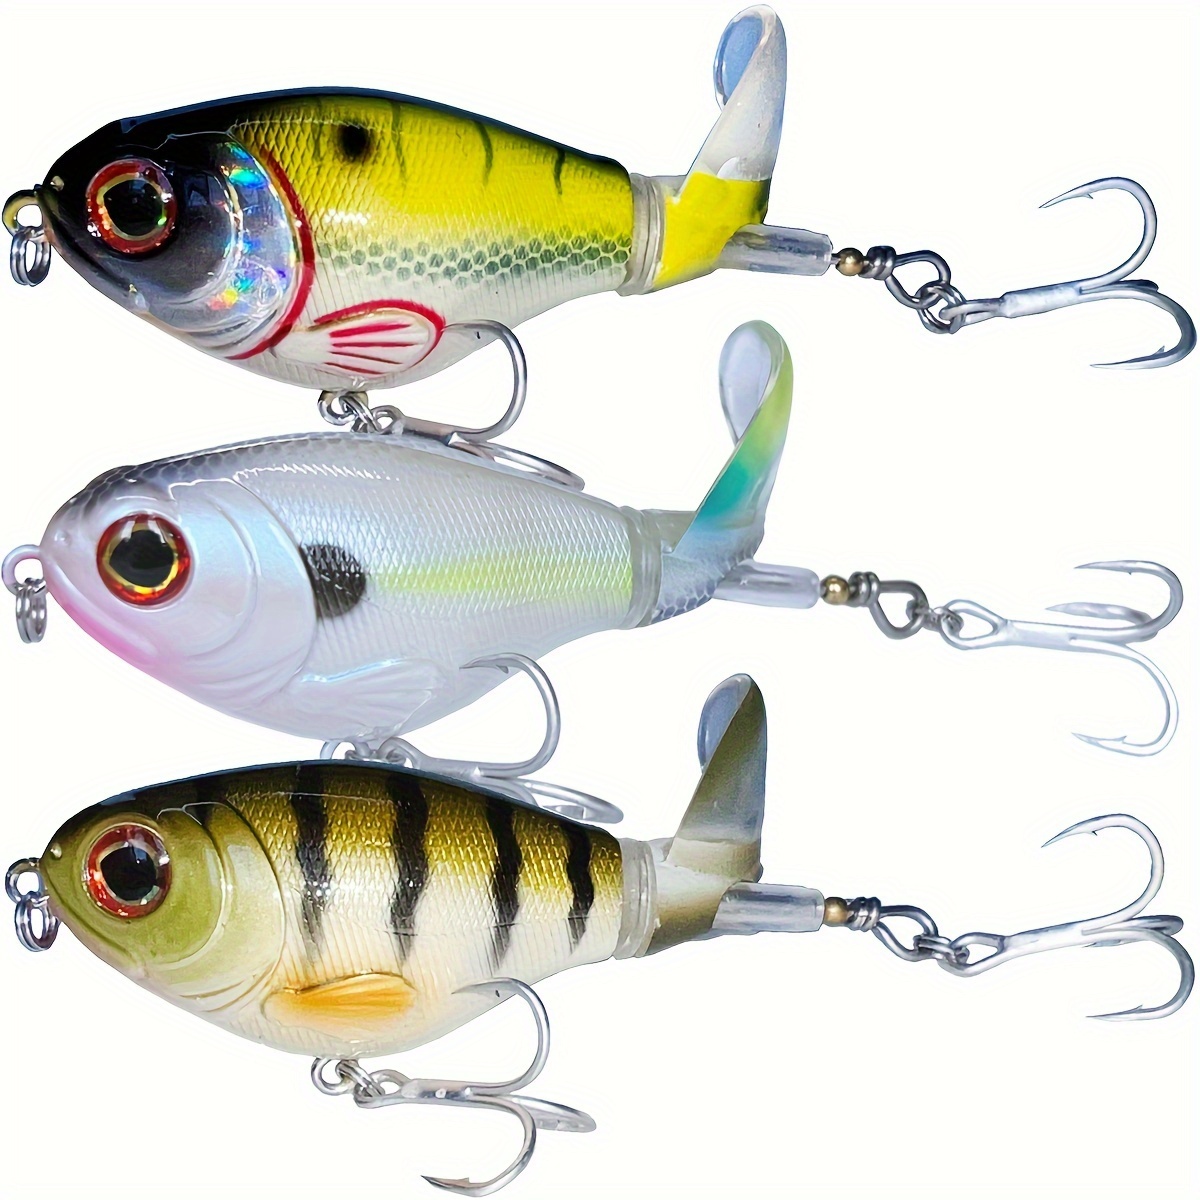 DYNWAVECA Topwater Fishing Lure Floating Lure Lifelike Plopping Bass Lure  Top Water Bass Lure for Trout, Bass, Perch Freshwater Fishing Blue 